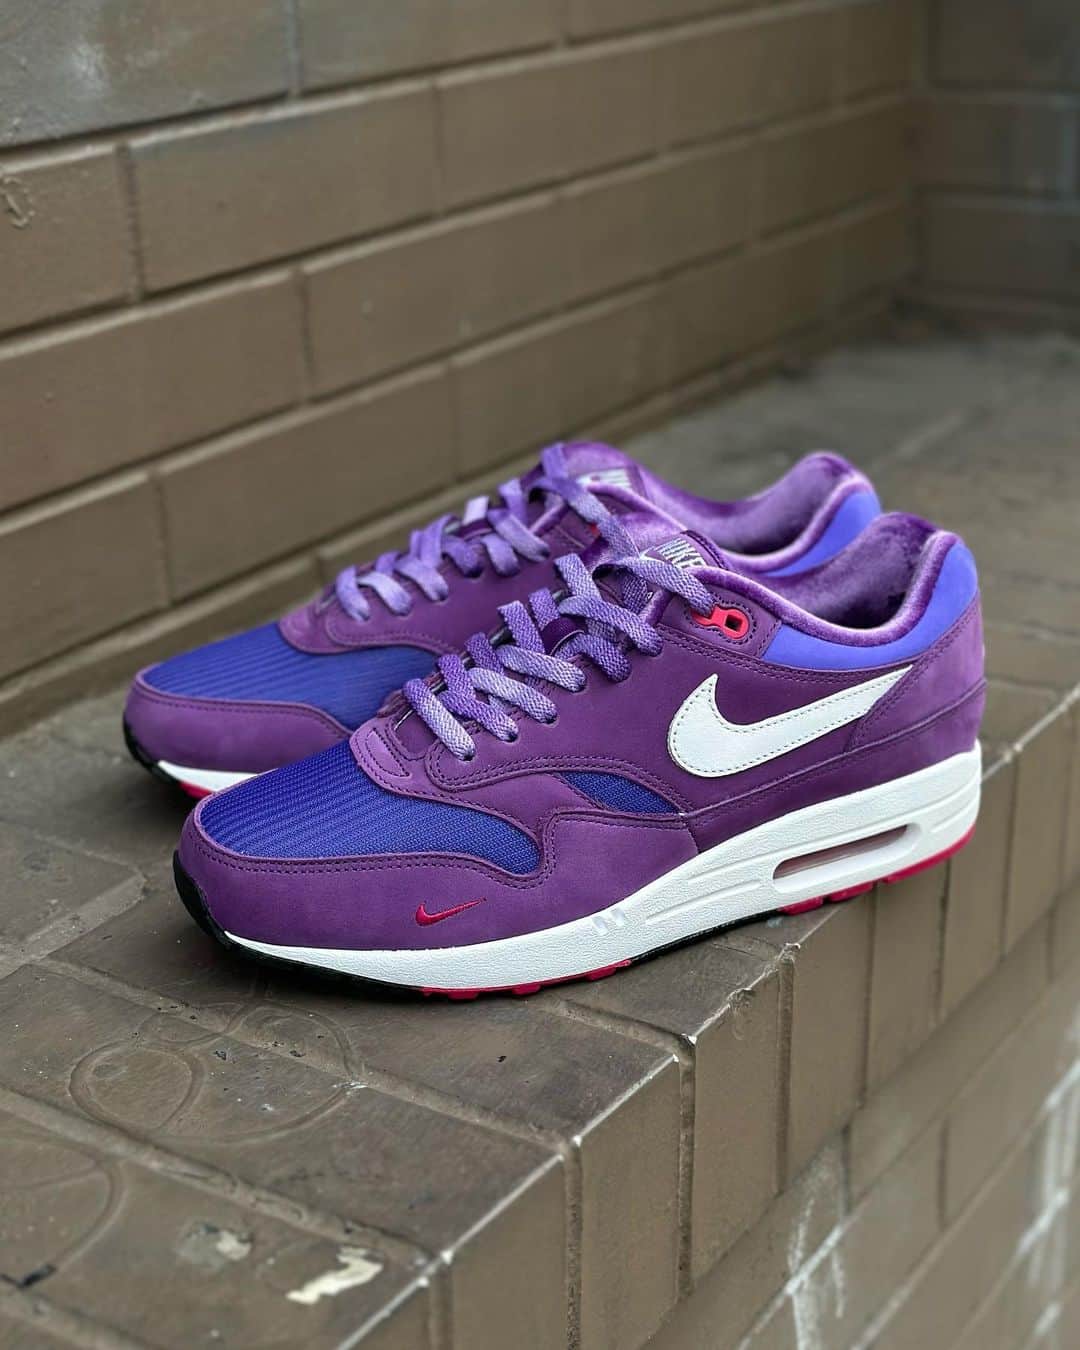 Mr. Tyのインスタグラム：「#newpickup #nikebyyou #airmax1 2 of 4. Achieving a balance in life (and design) is important, so it was mandatory to create a pair for the Summer to counter my black Fall pair. I combined Purple and Ultra Marine shades, along with vibrant Fireberry pops, to for a lively and energetic feel. I opted for the velvet lining again to enhance the overall monochromatic color scheme. I dug into my bag of laces and swapped in a fun washed purple set to complete the shoe.  #am1 #ids #complexkicks #airmax kissmyairs #mynikeids #airmax87 #airmaxone #nikeid #complexkicks #ijustlikeshoes #theshoegame #airmaxalways #mynikeid #crepecity #ファッション #コーティネート」